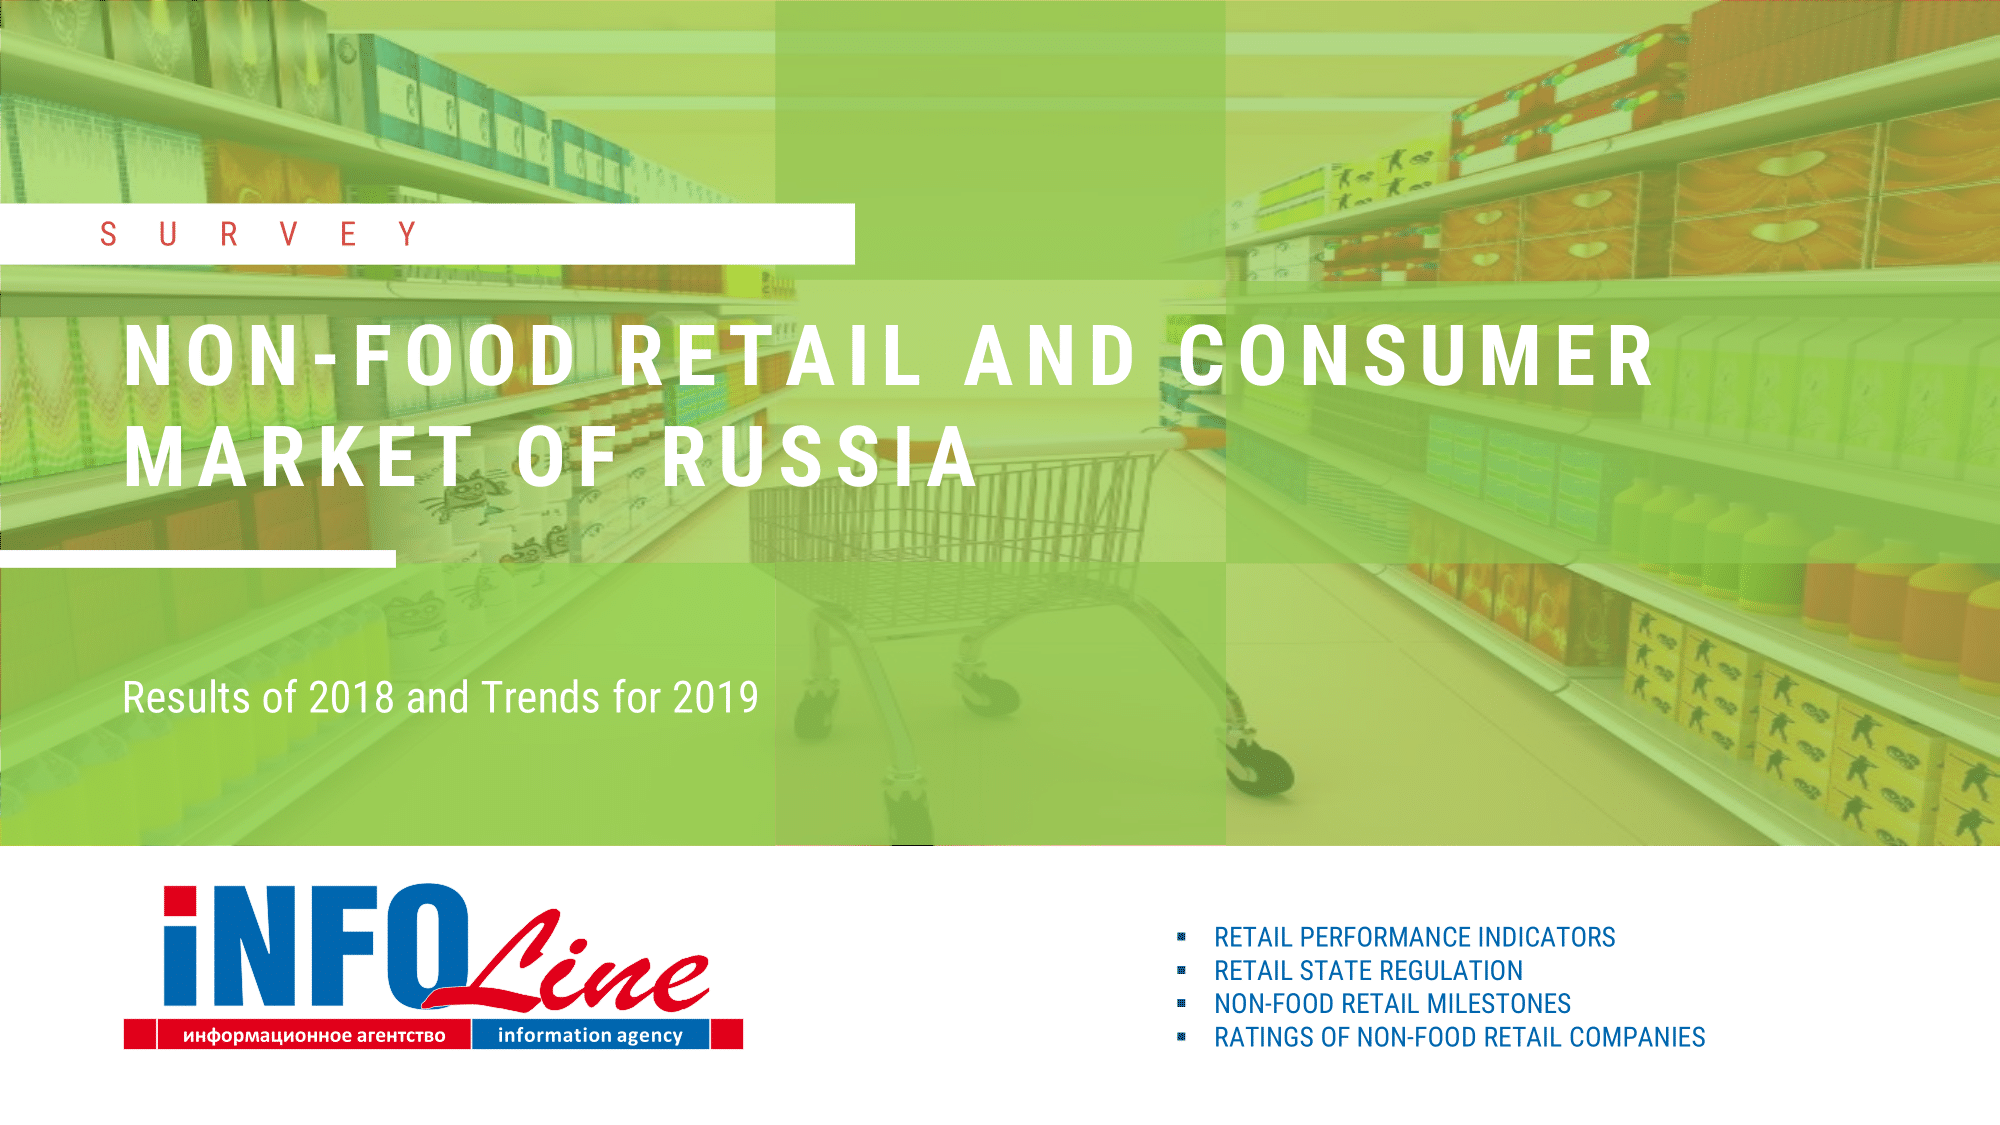 "Non-Food Retail and Consumer market of Russia Review. Results of 2018 and trends of 2019. Development prospects till 2021"